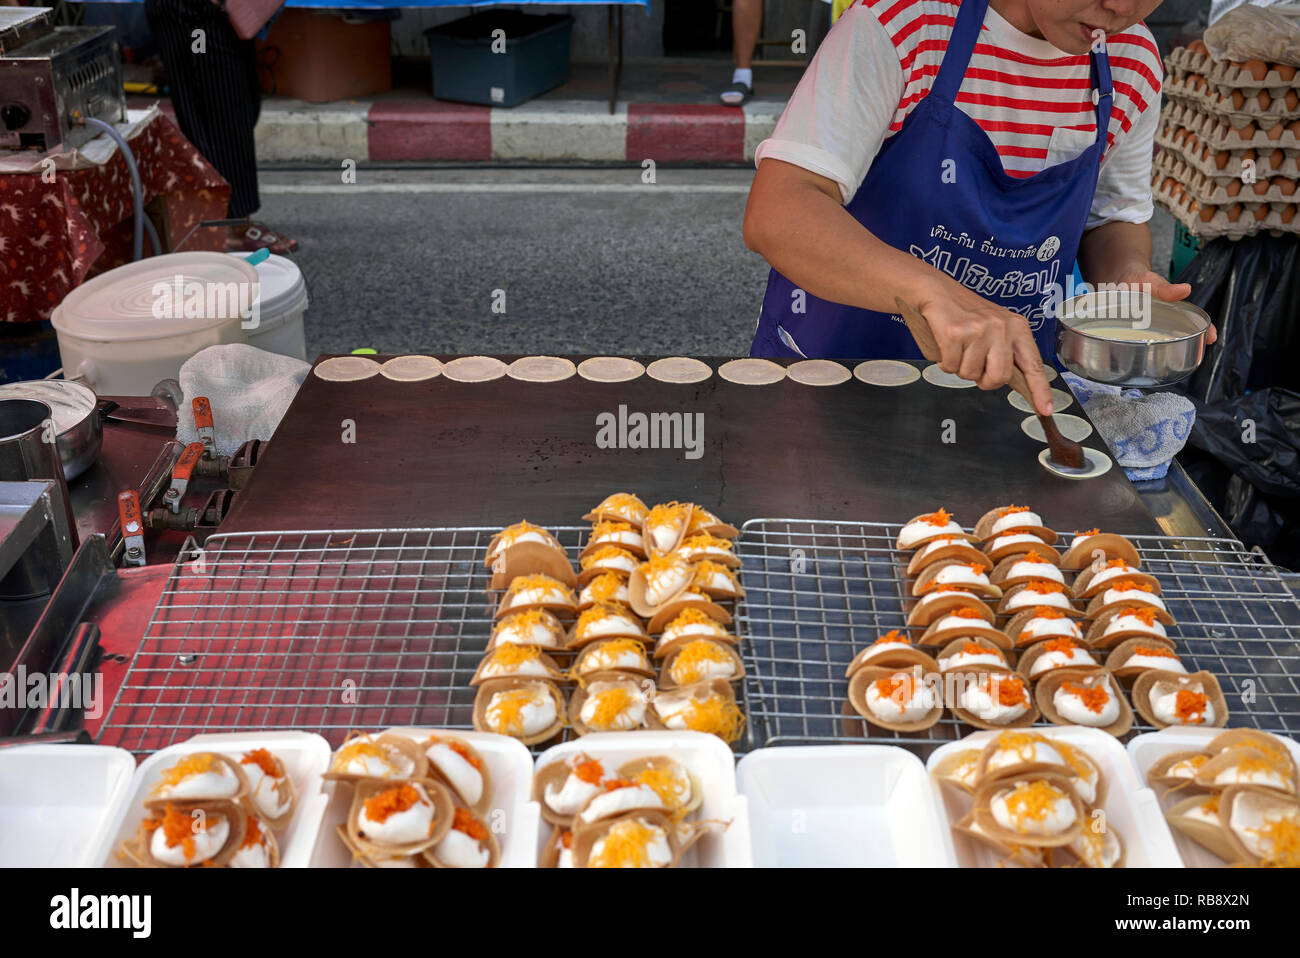 Thailand sweet. Food vendor preparing a popular Thailand sweet known as Khanom Bueang at her street food stall. Stock Photo